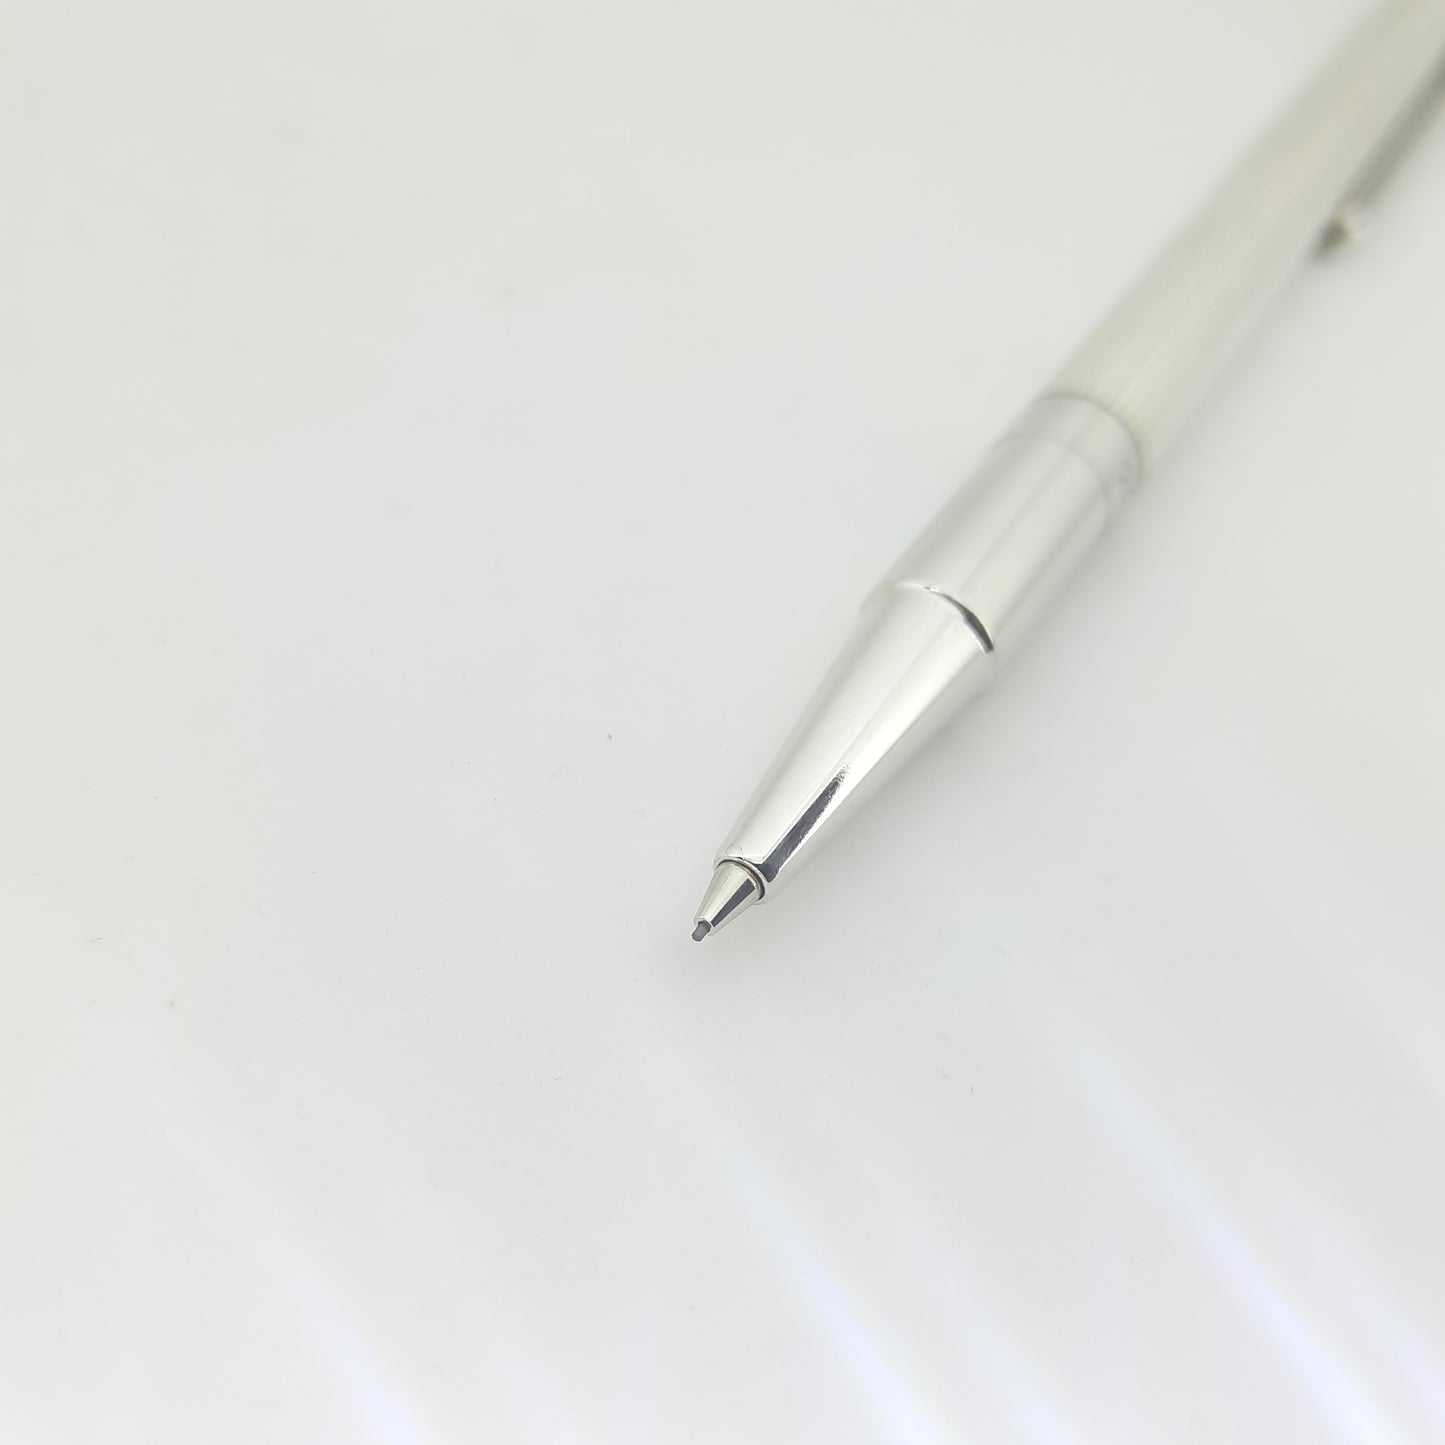 Waldmann Sterling Silver Lines Pattern With Engraving Space Twist Action Pencil